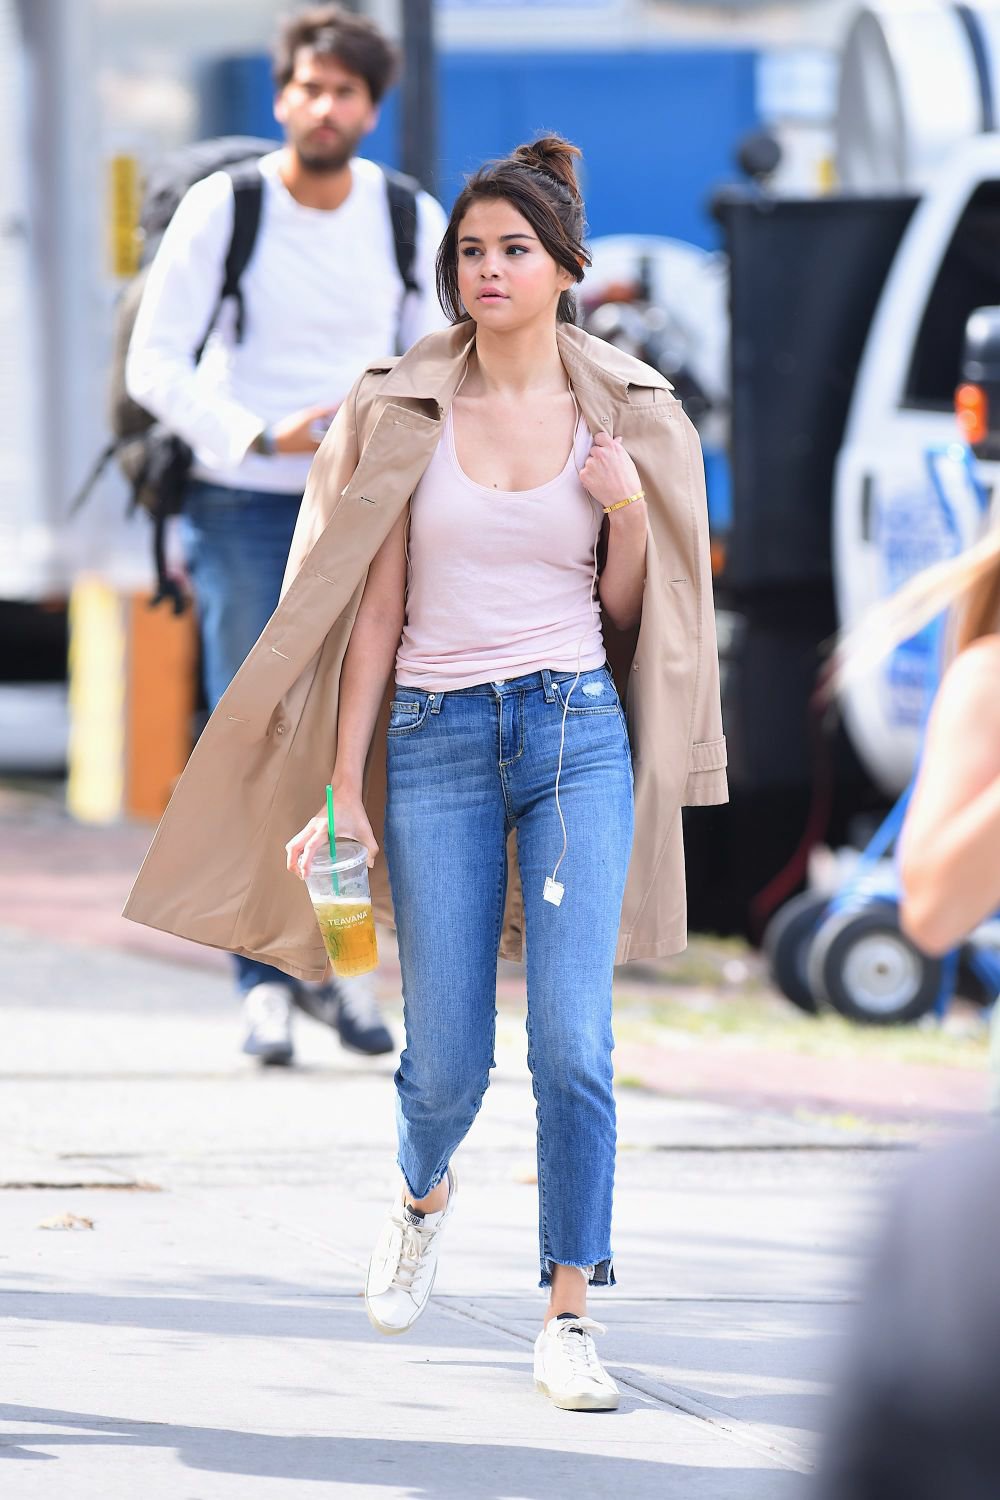 while shooting movie selena spotted wearing simple pink tank compress93129200954848866729